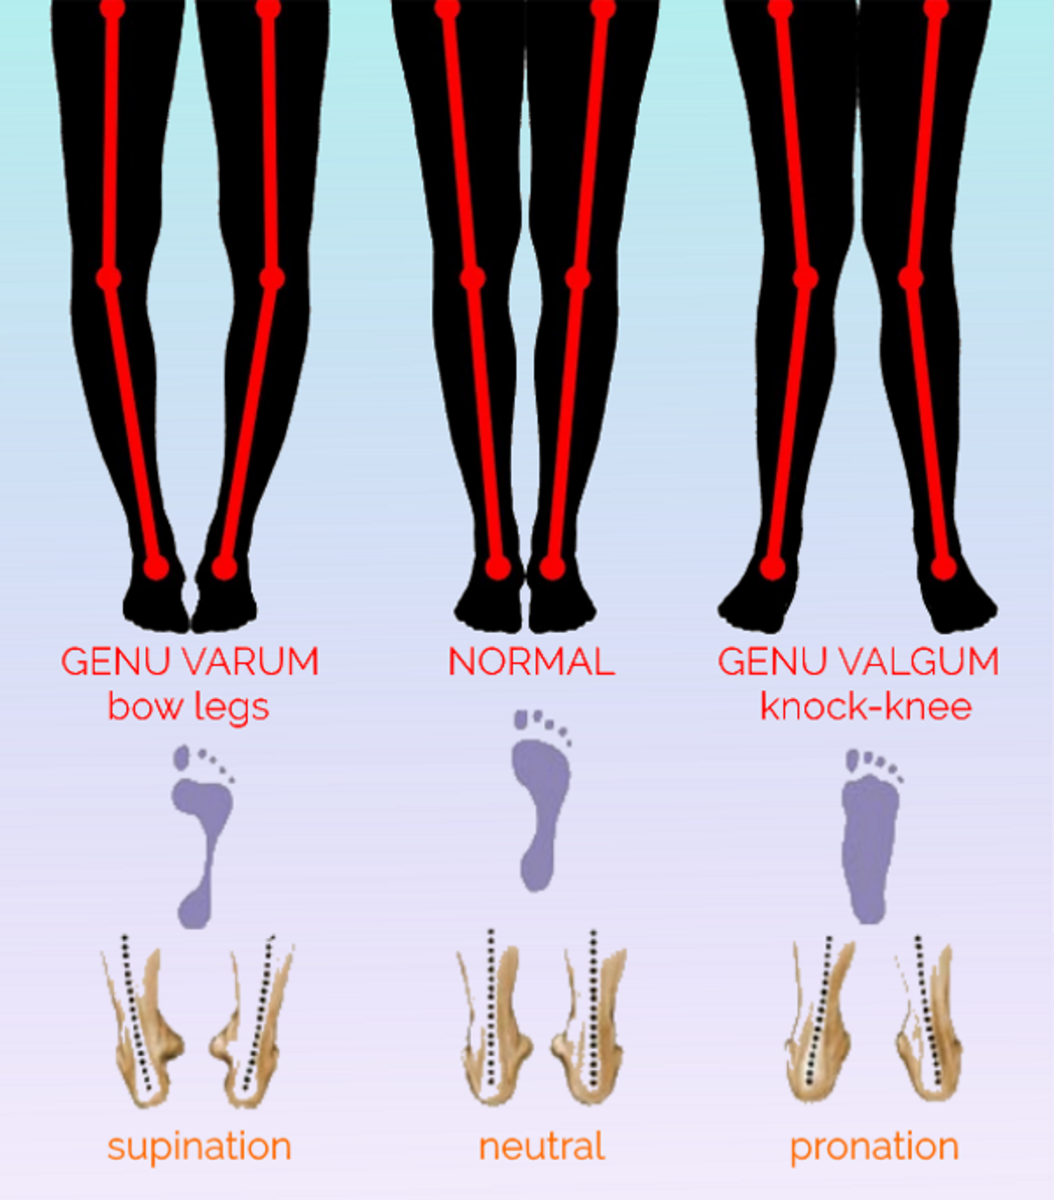 For best performance in standing and walking, starting at the base, all the joints in the leg should be vertically aligned as in the center image.